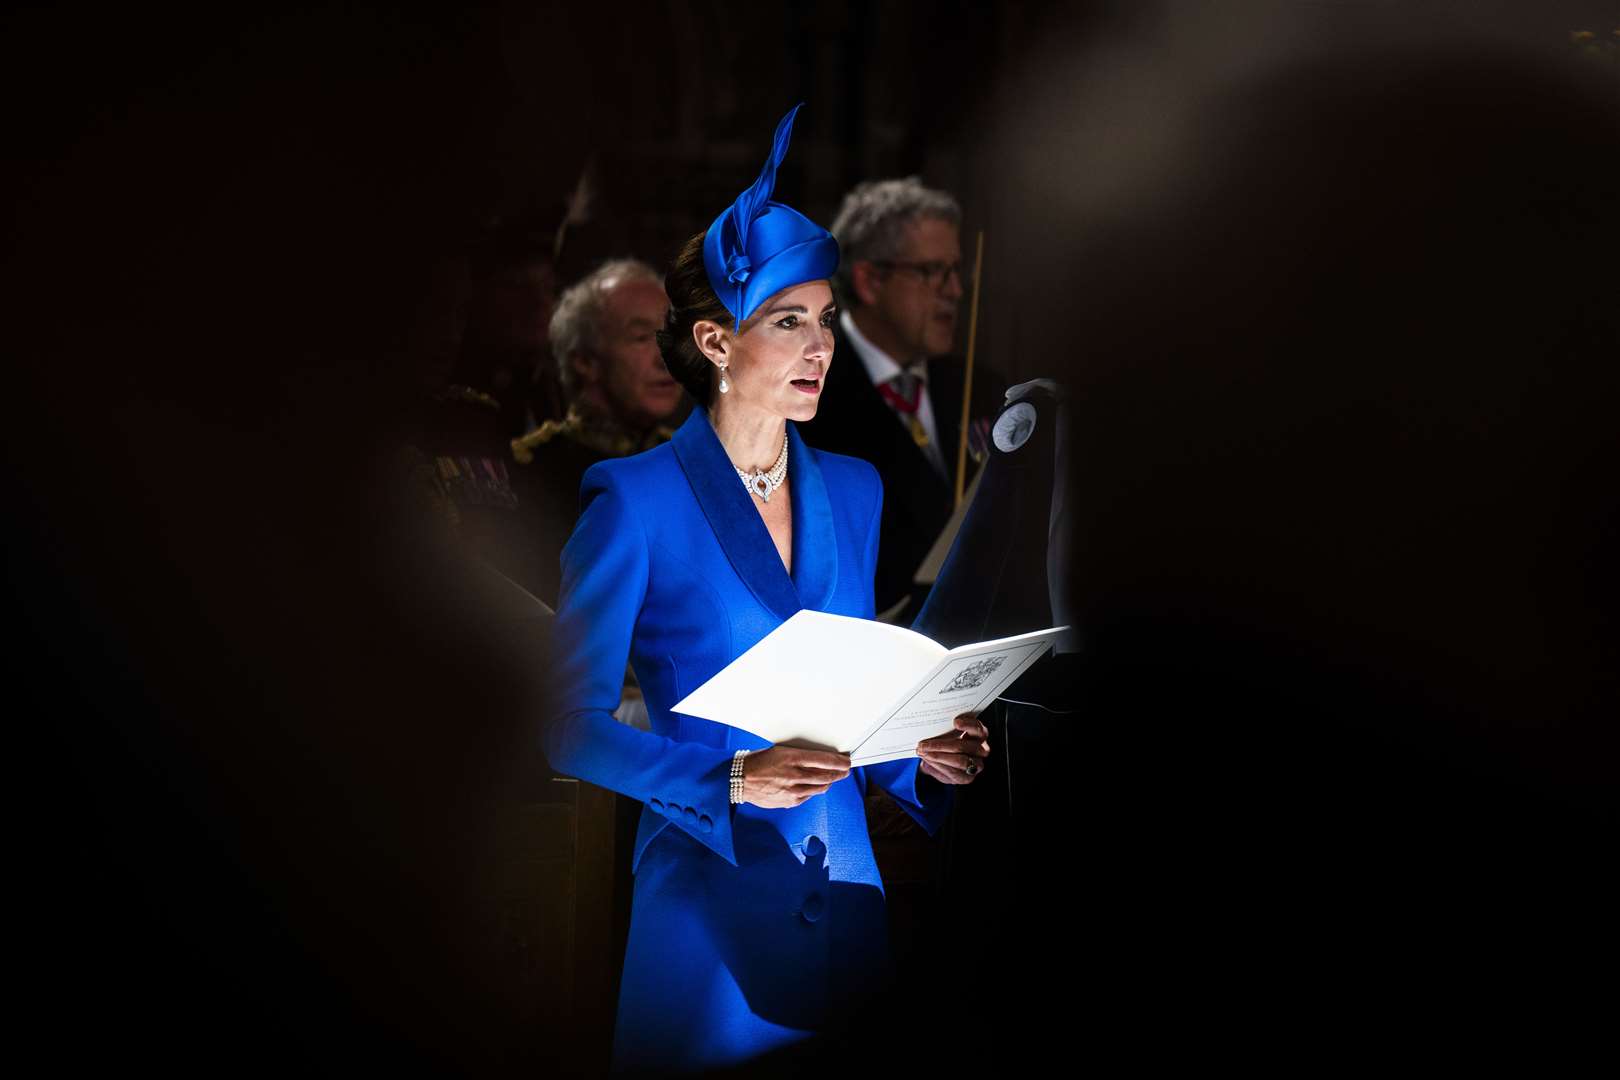 The Princess of Wales, known as the Duchess of Rothesay while in Scotland, during the National Service of Thanksgiving and Dedication for King Charles III and Queen Camilla, and the presentation of the Honours of Scotland, at St Giles’ Cathedral, Edinburgh (Jane Barlow/PA)